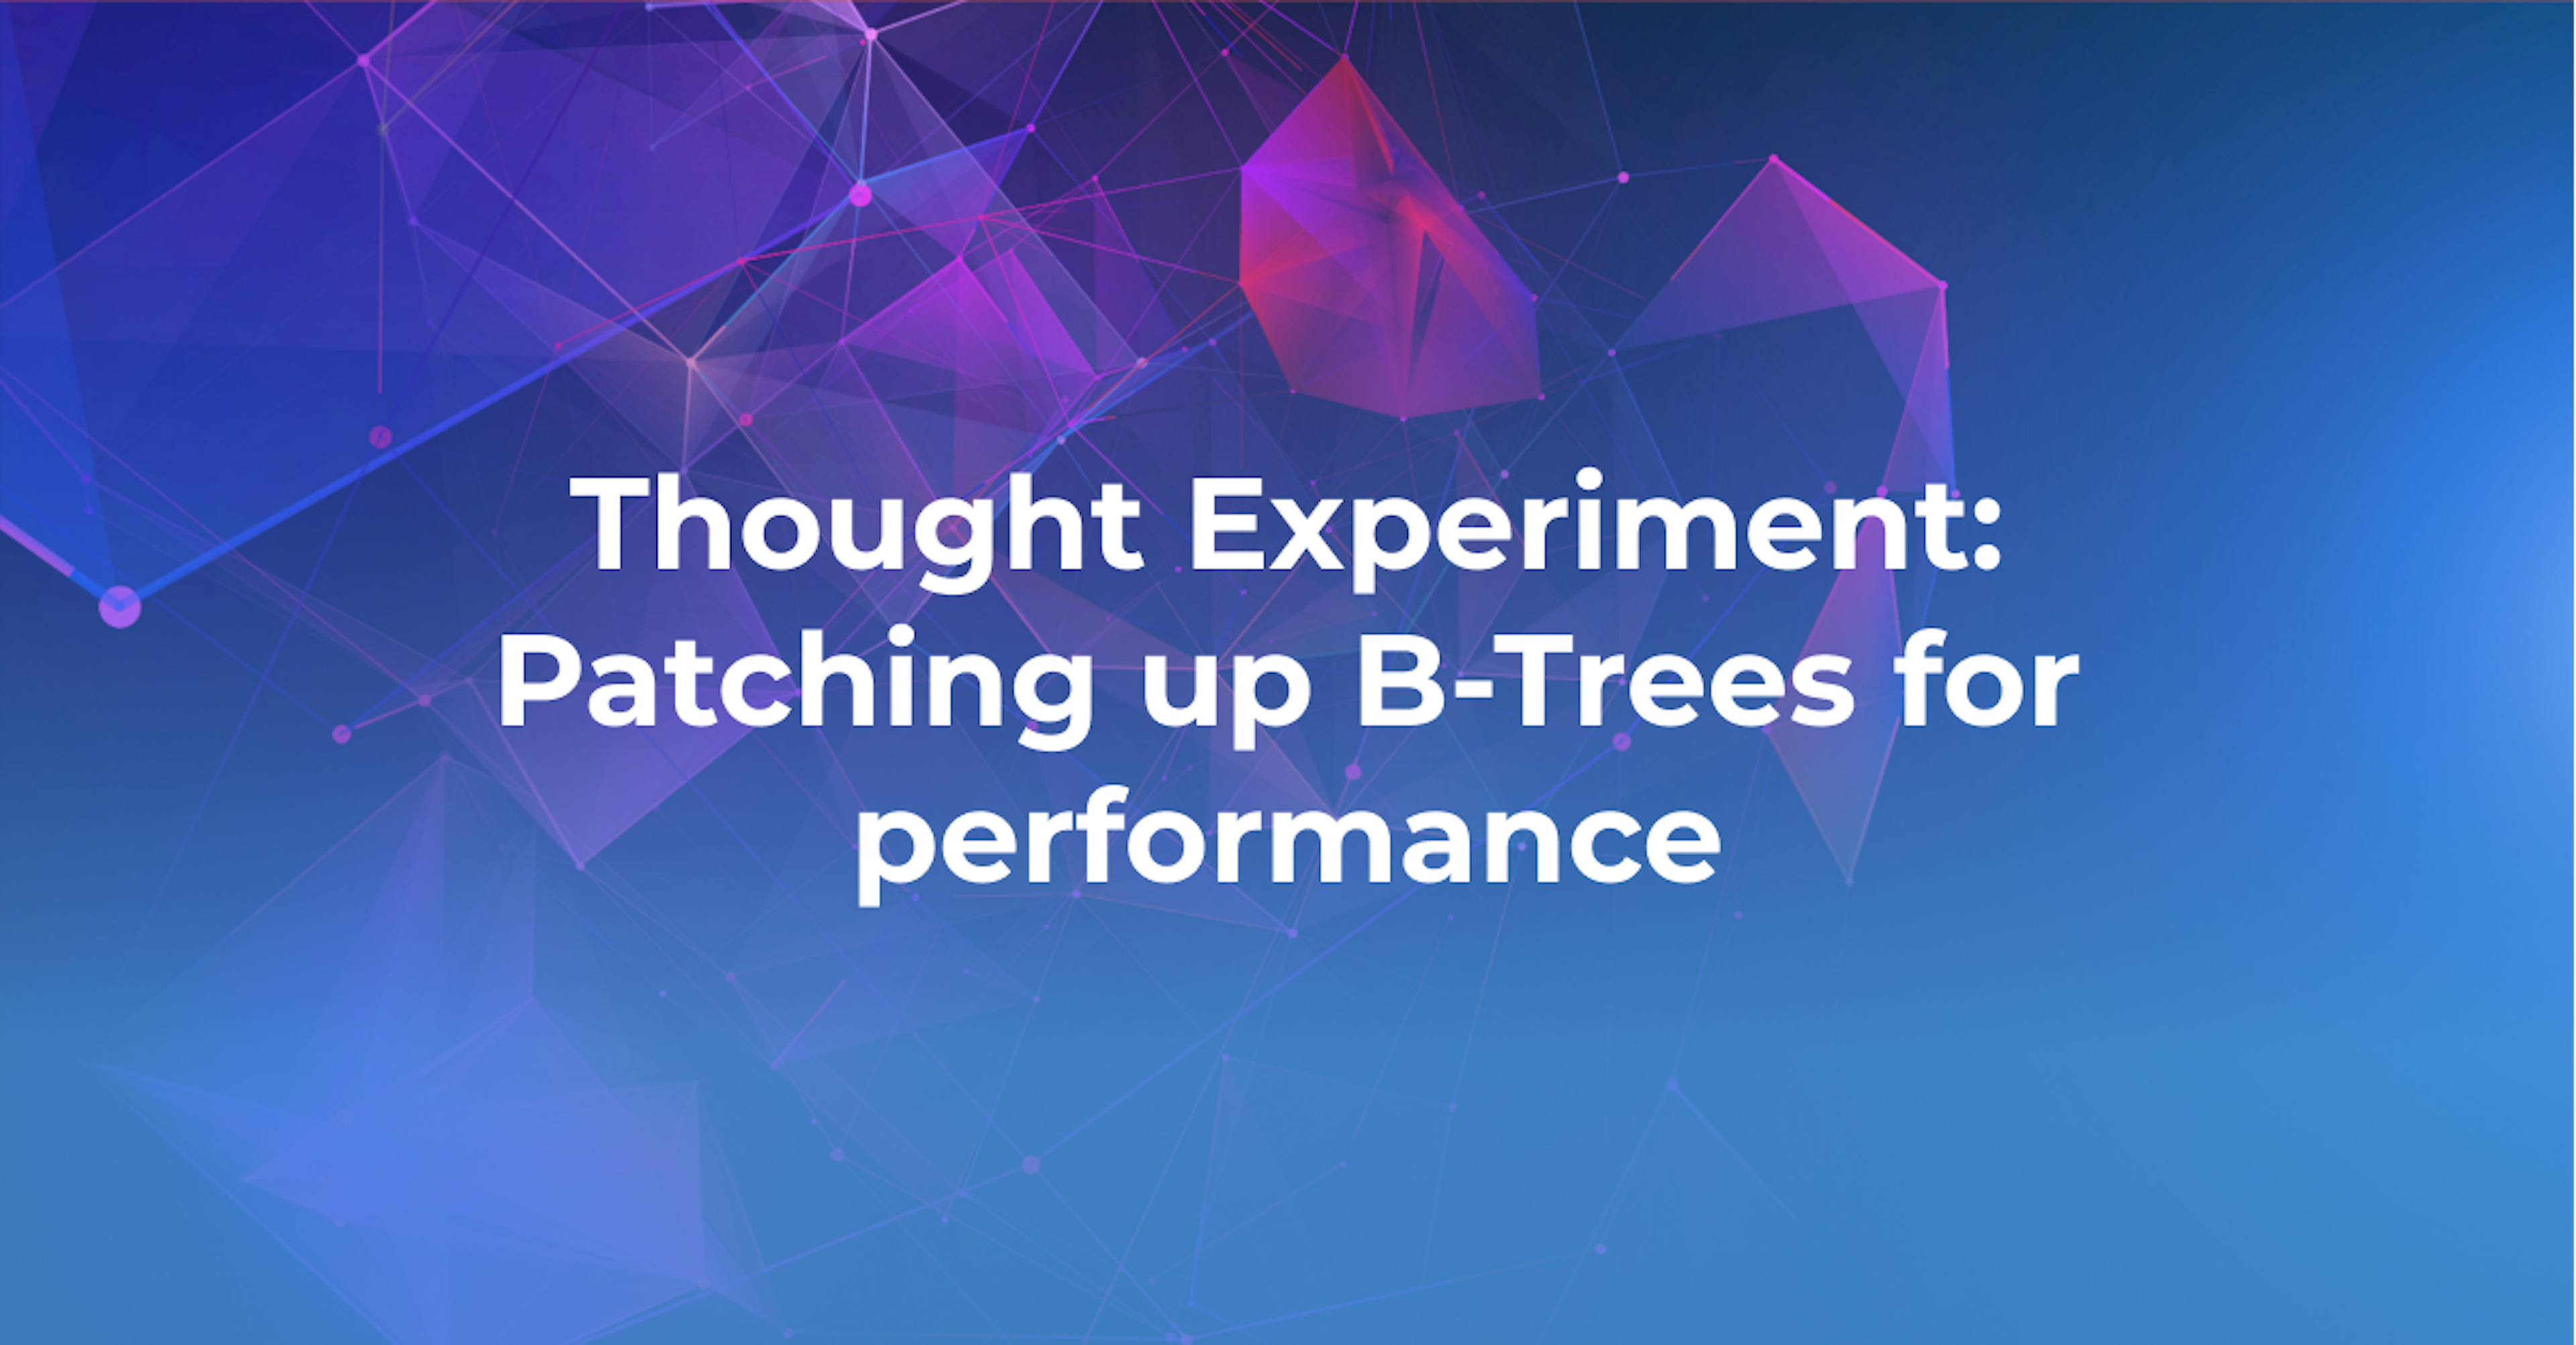 Thought Experiment: Patching up B-Trees for performance